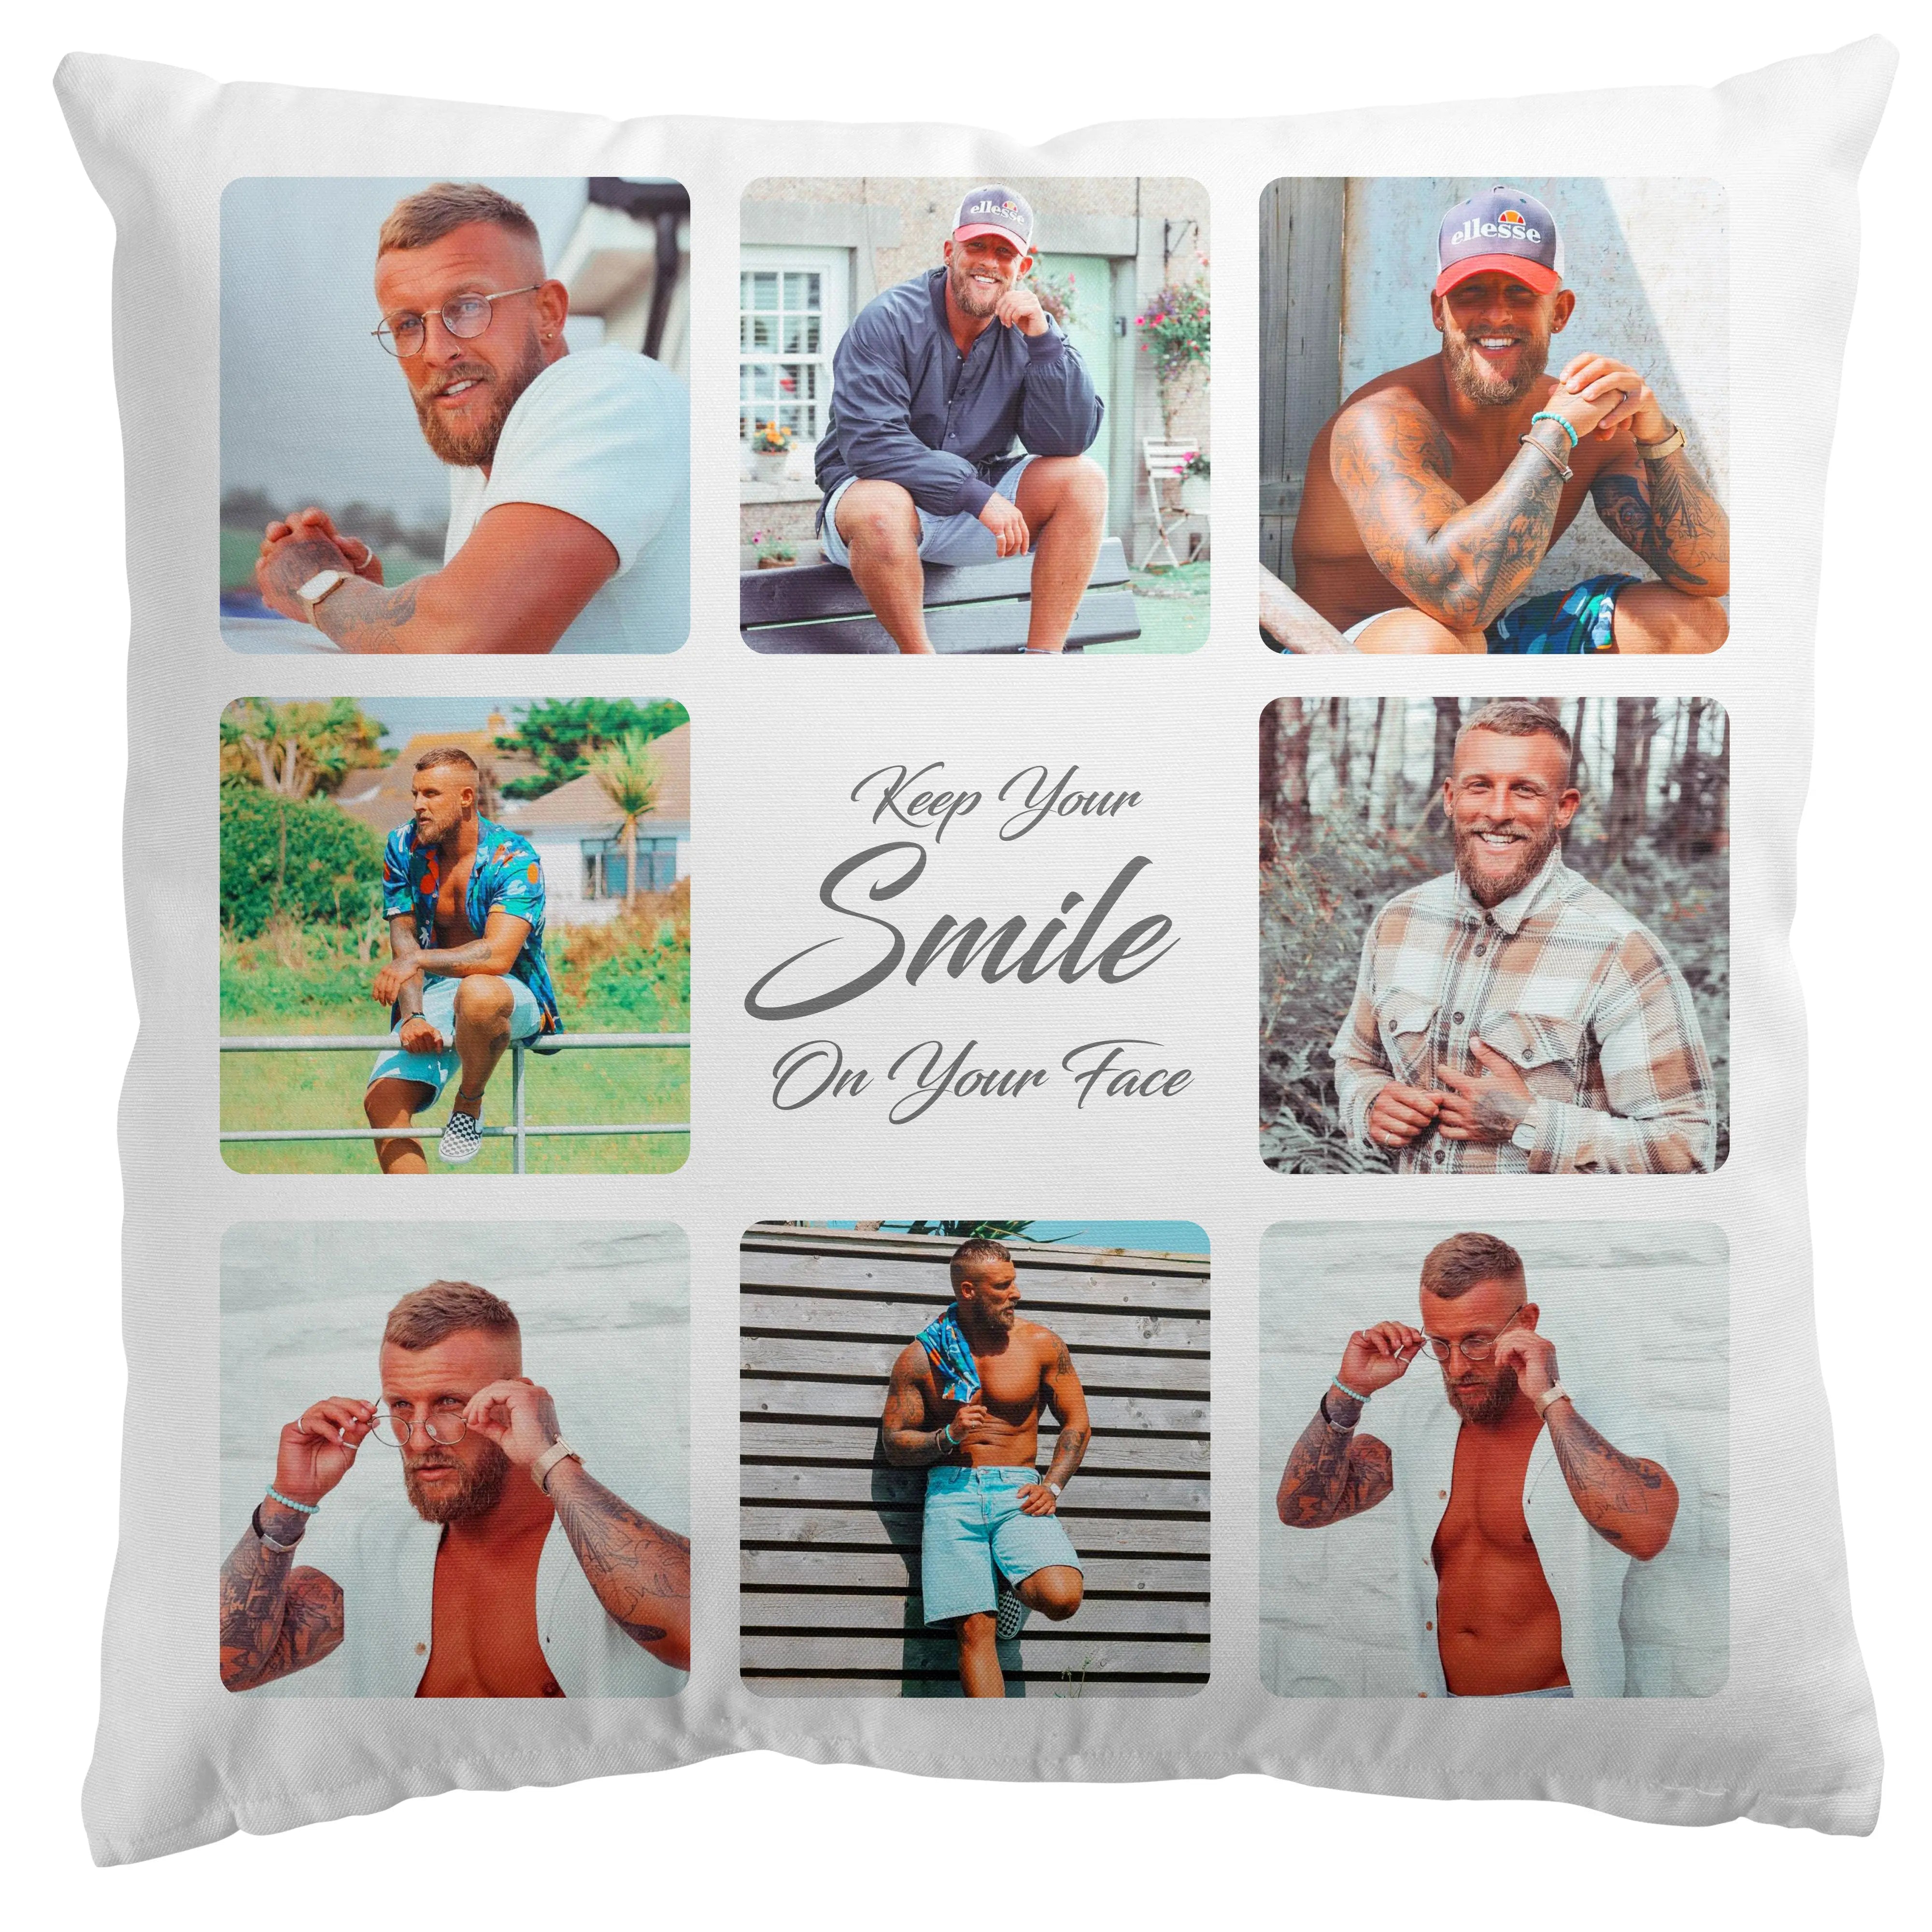 Cushion Cover 40x40cm - Ryan - 8 image - Keep your smile